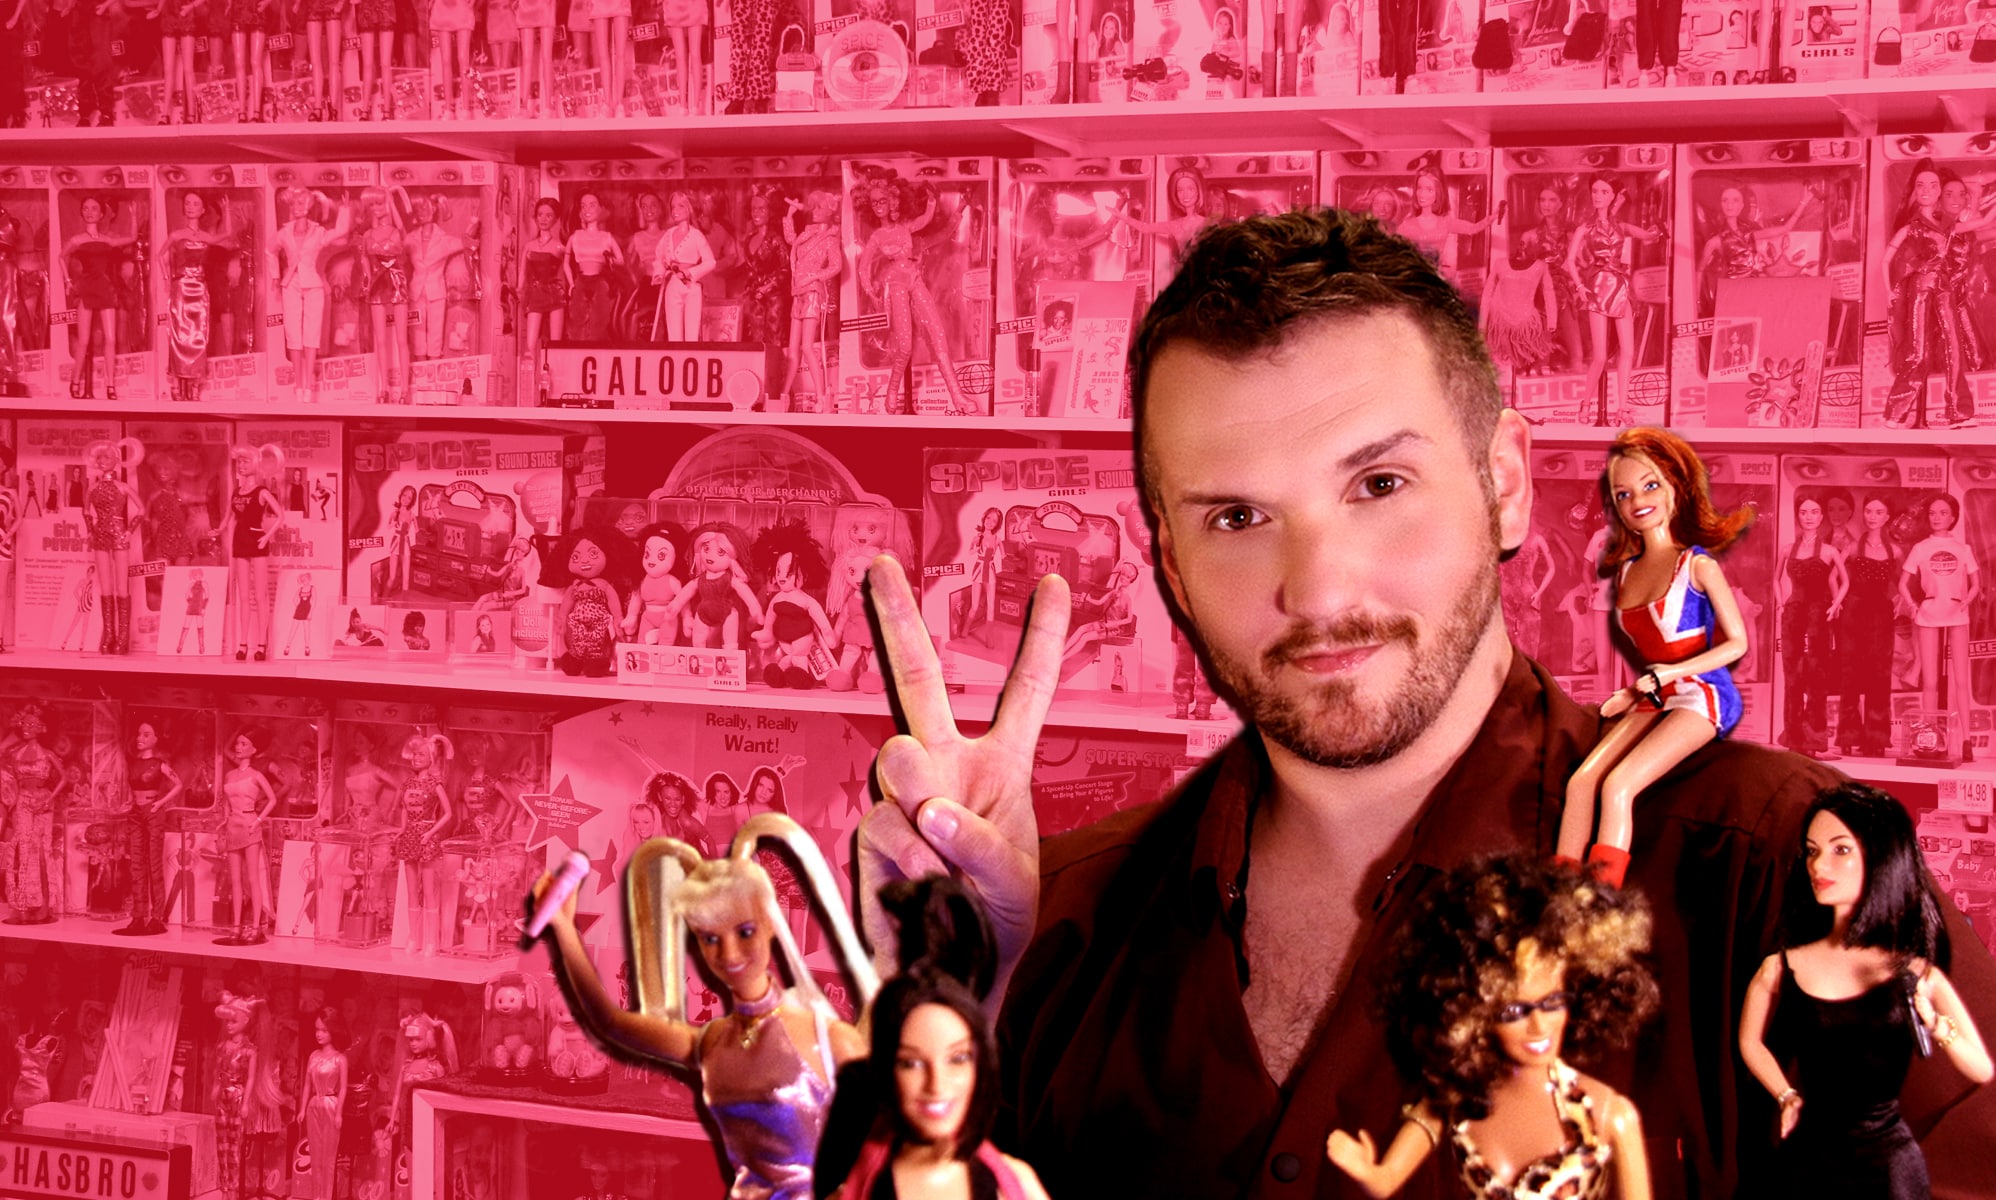 Meet the man who built world’s largest collection of Spice Girls dolls: ‘I’ll never be finished!’